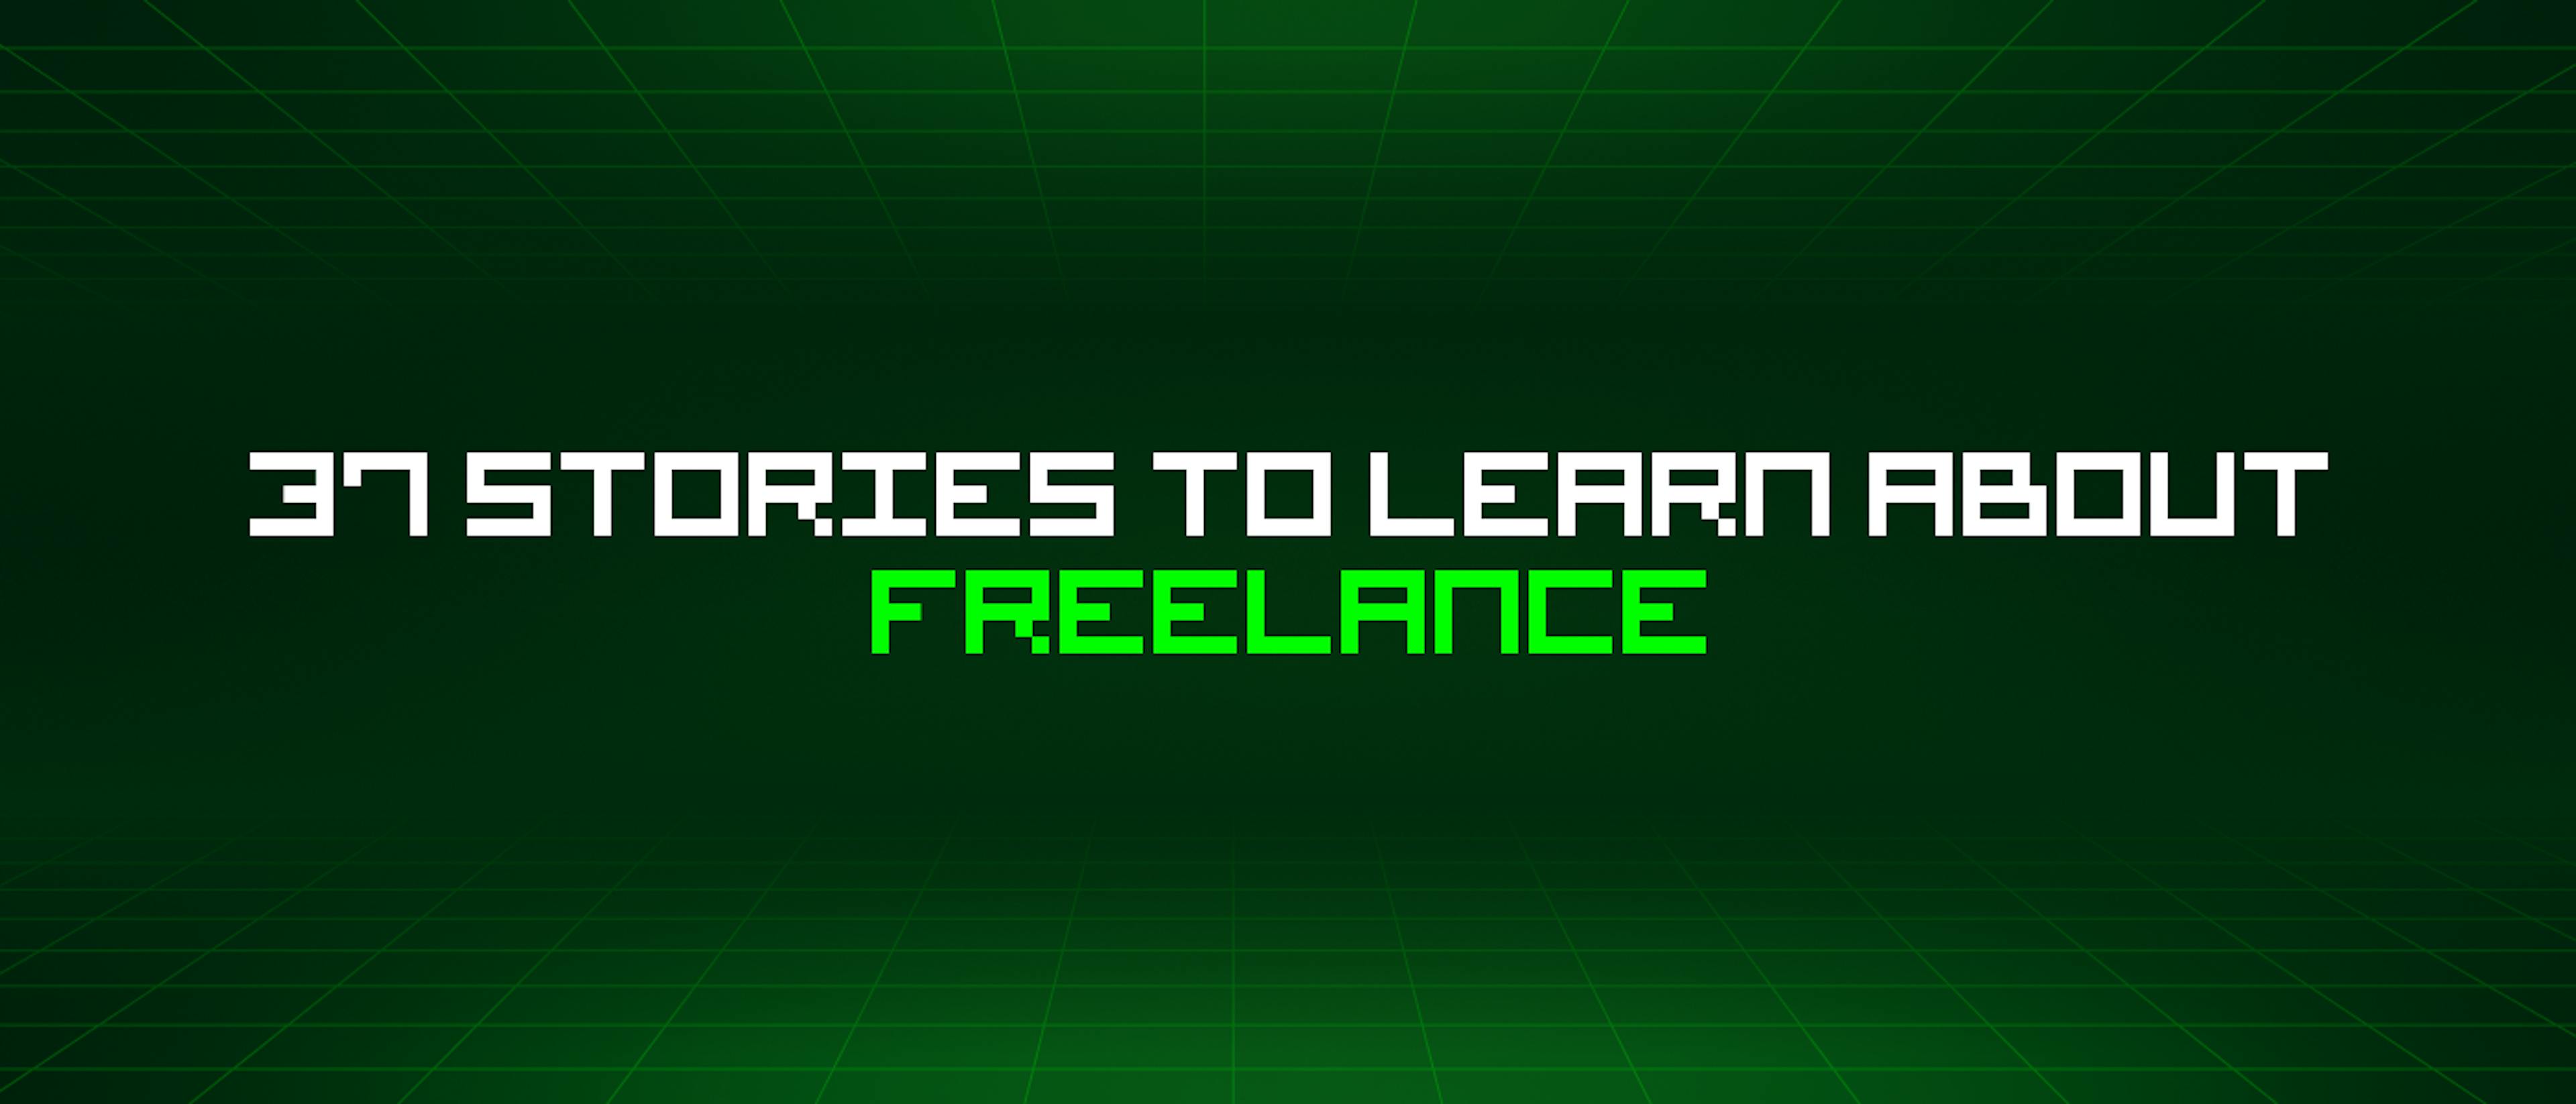 featured image - 37 Stories To Learn About Freelance